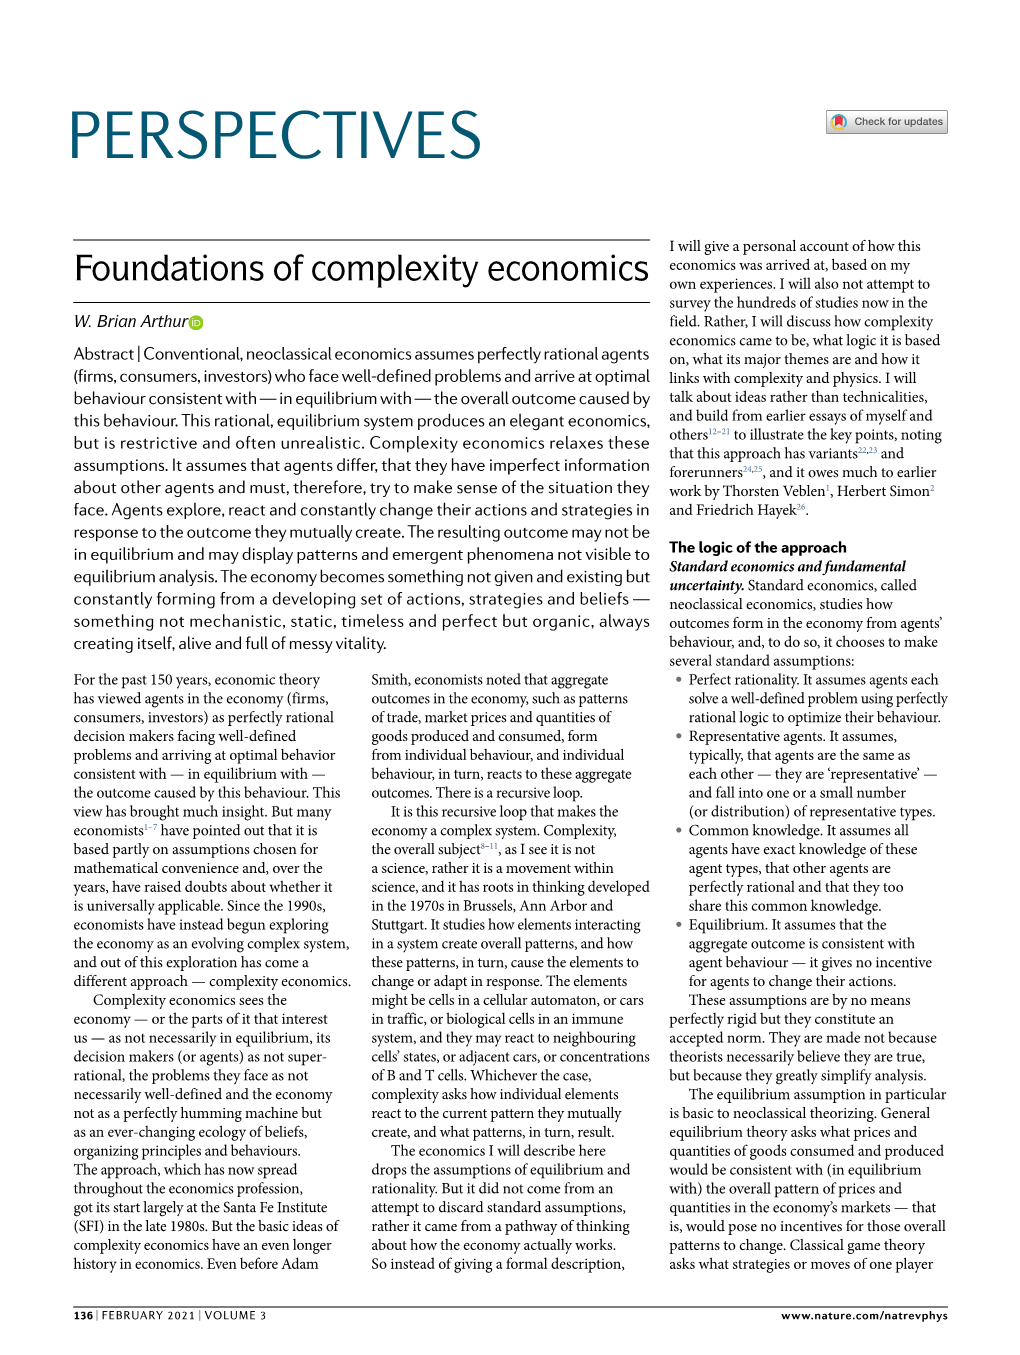 Foundations of Complexity Economics Own Experiences